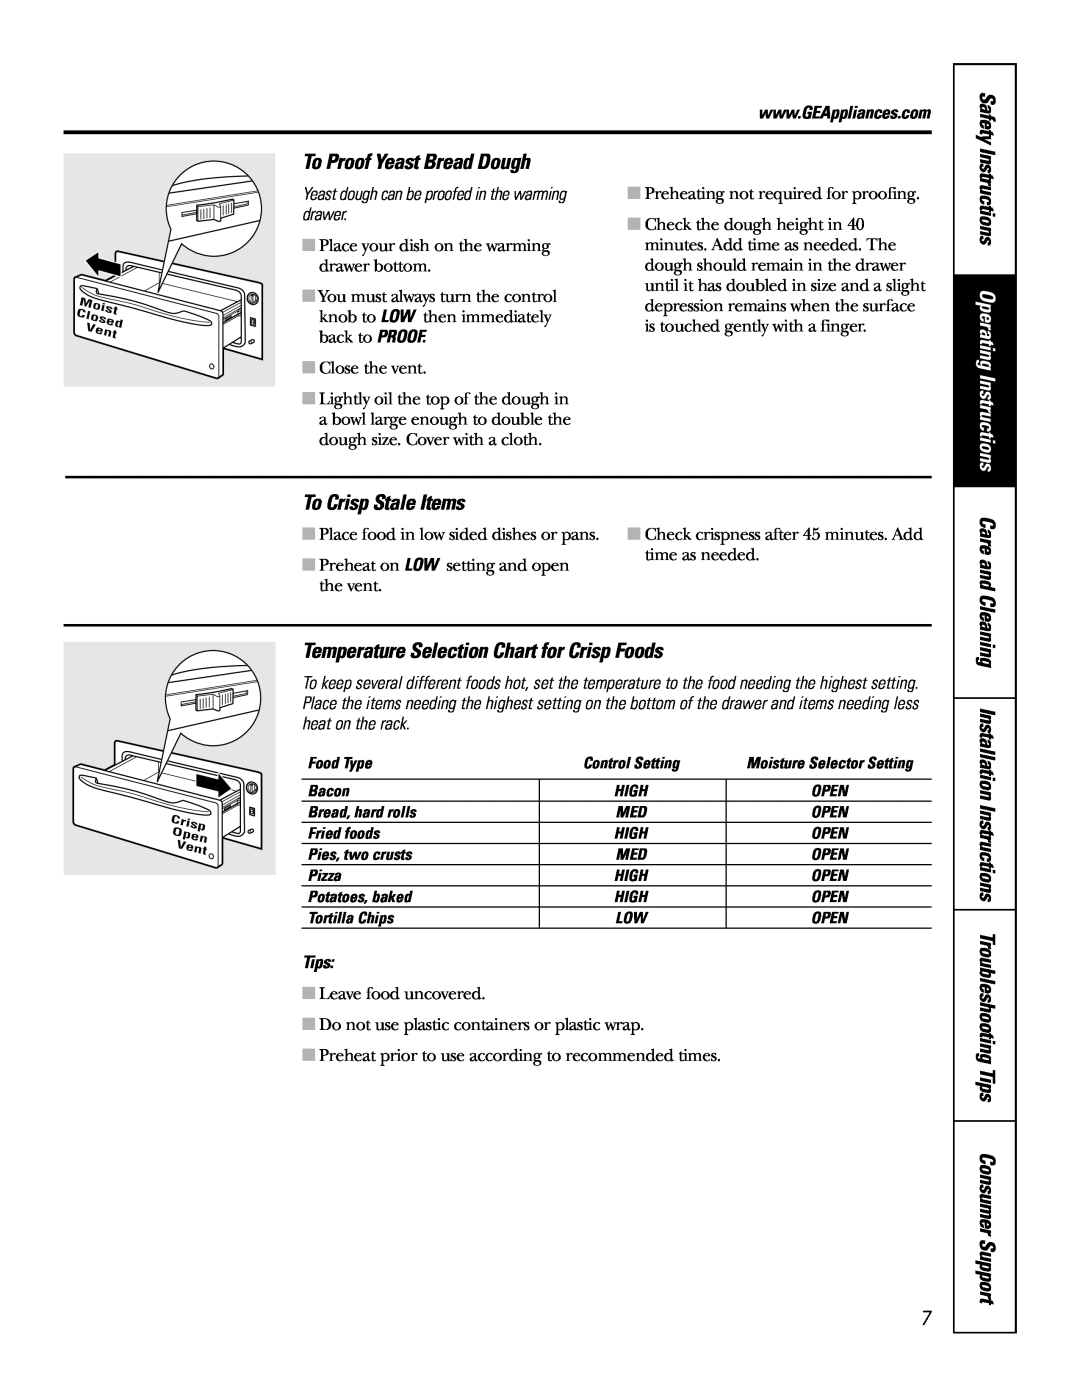 GE JTD915 To Proof Yeast Bread Dough, To Crisp Stale Items, Temperature Selection Chart for Crisp Foods, Safety, Tips 